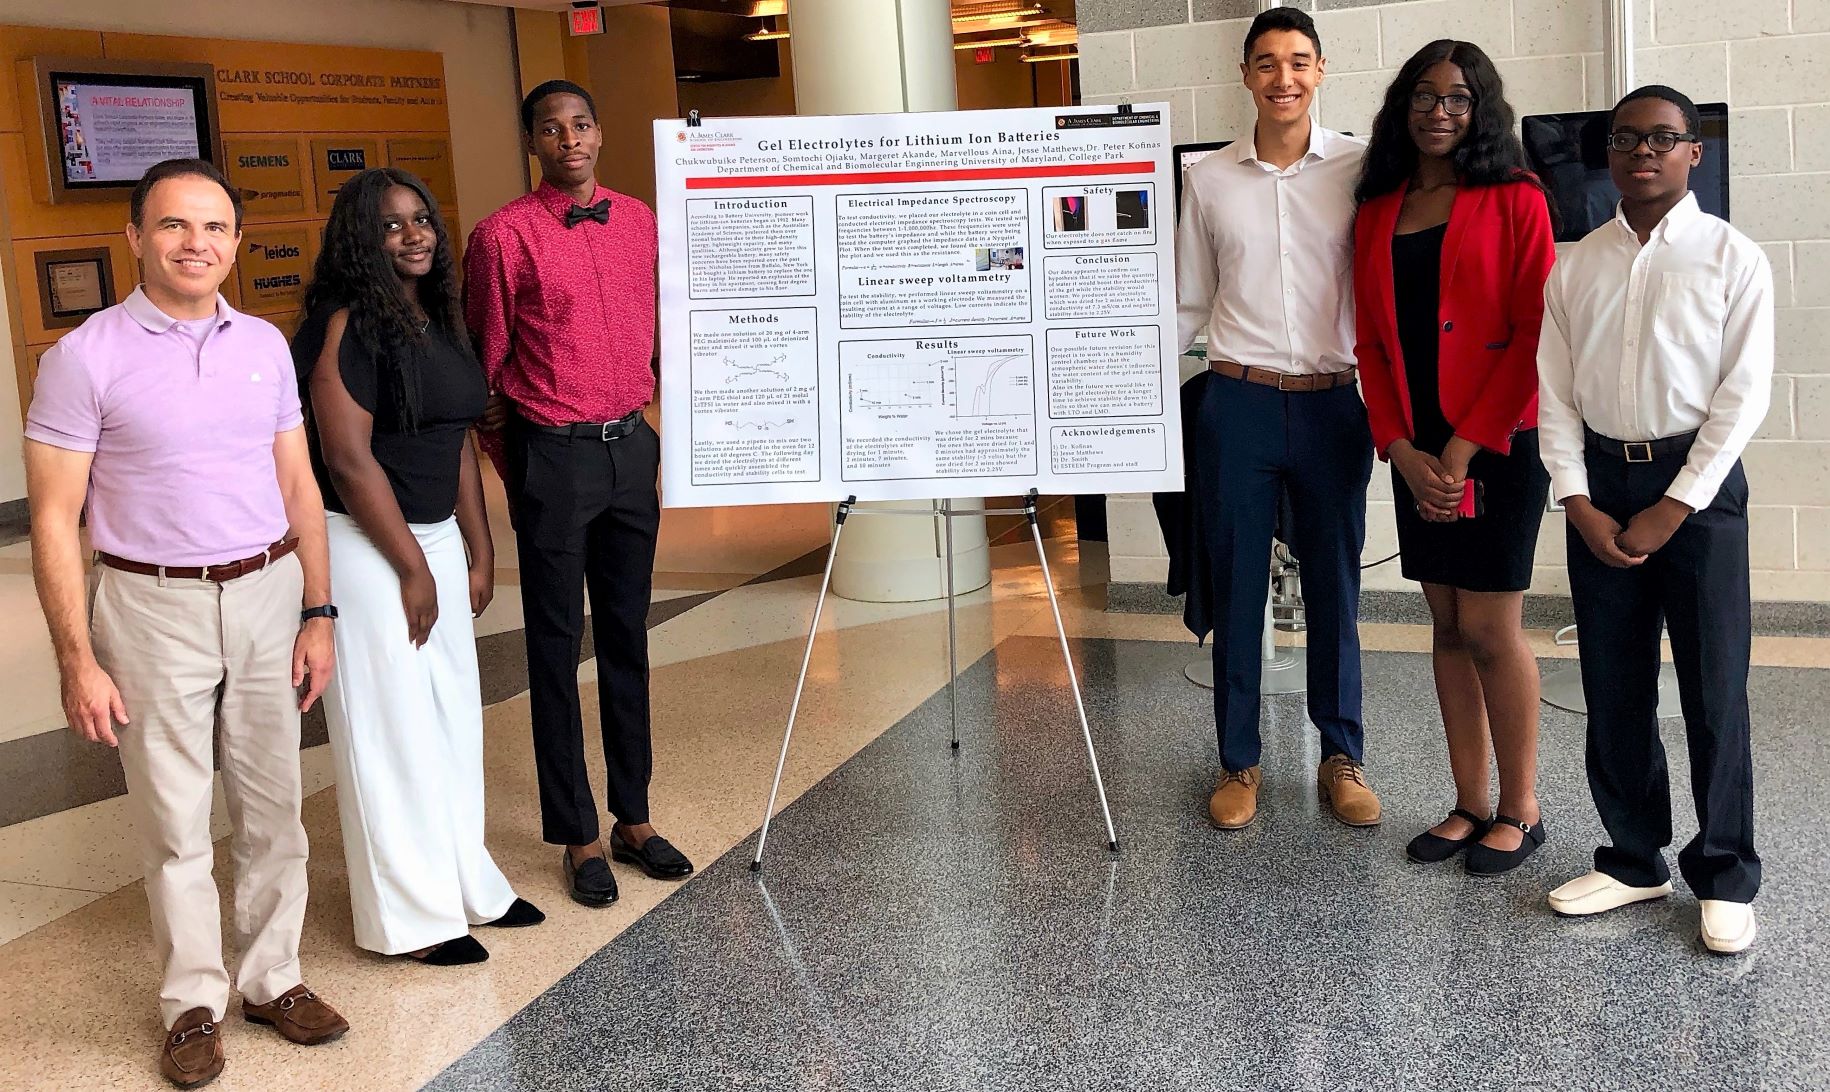 Image: Kofinas (far left) and Matthews (third from right) pictured during the 2019 program with high school students from the local area. Photo provided by J. Matthews.